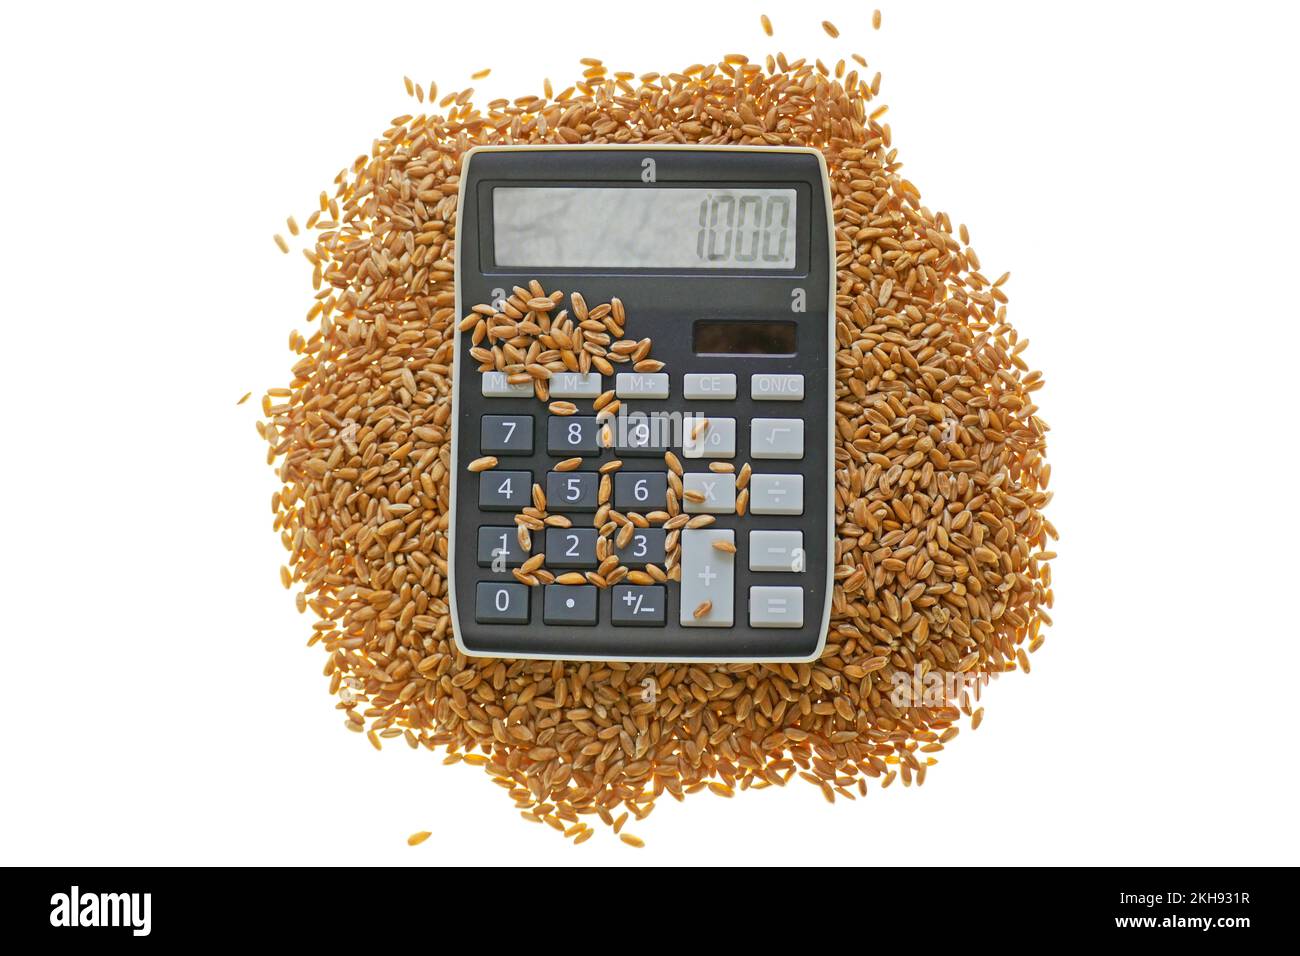 Growth in world prices for wheat and flour Sale and purchase of wheat concept. Wheat prices. Wheat grains and a calculator on a white background. Stock Photo